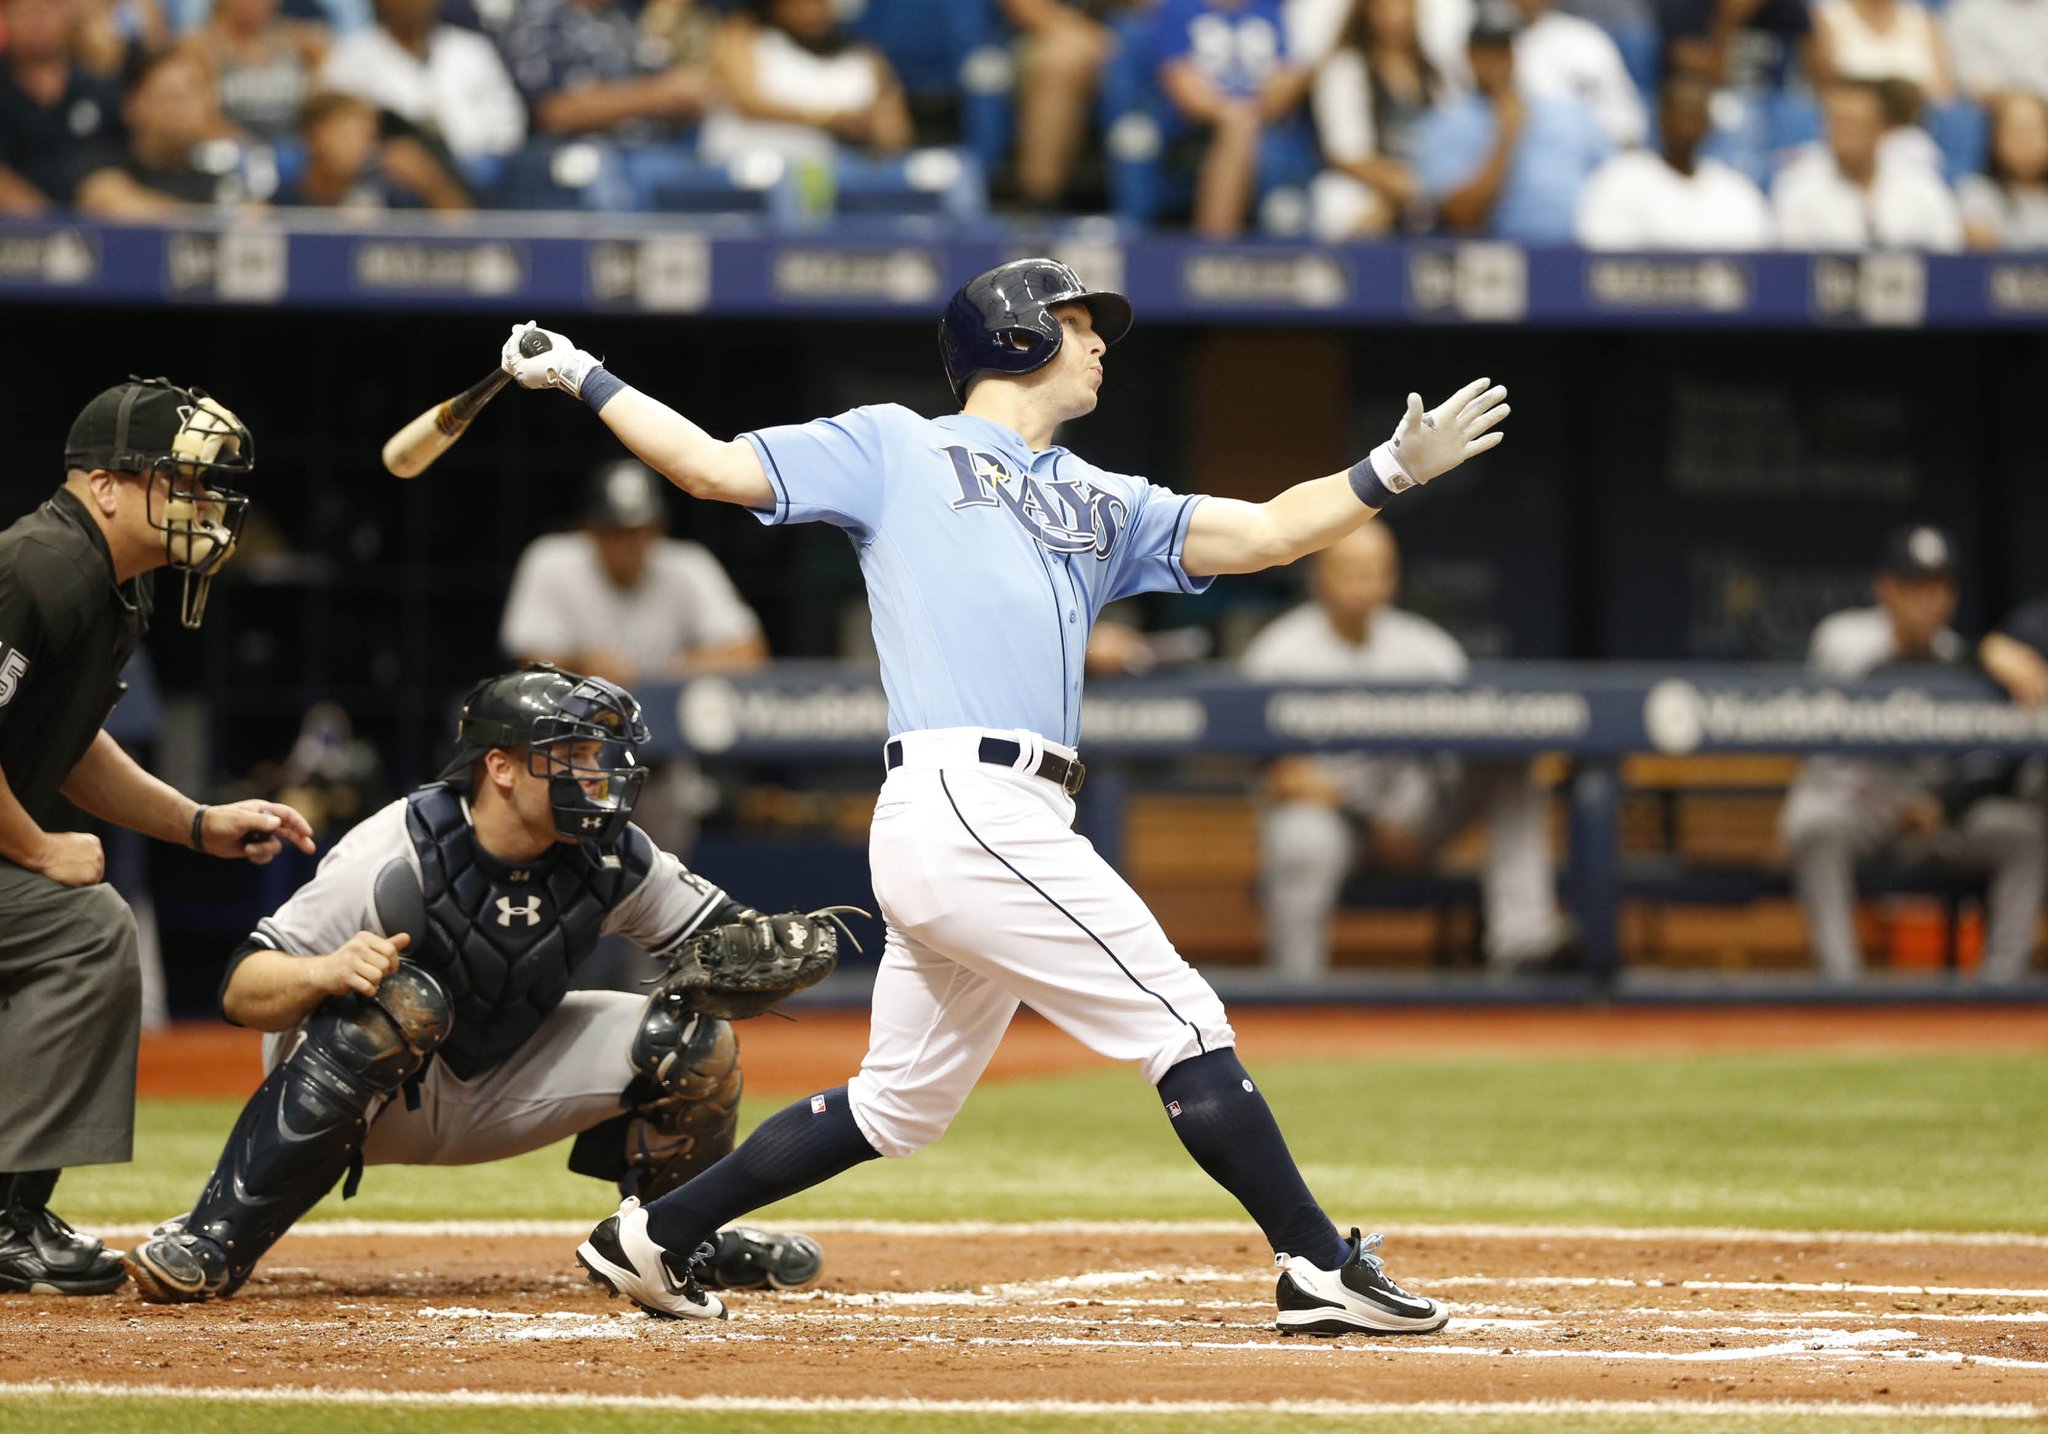 Corey Dickerson now has 36 extra base hits on the season. (Photo Credit: Tampa Bay Rays)